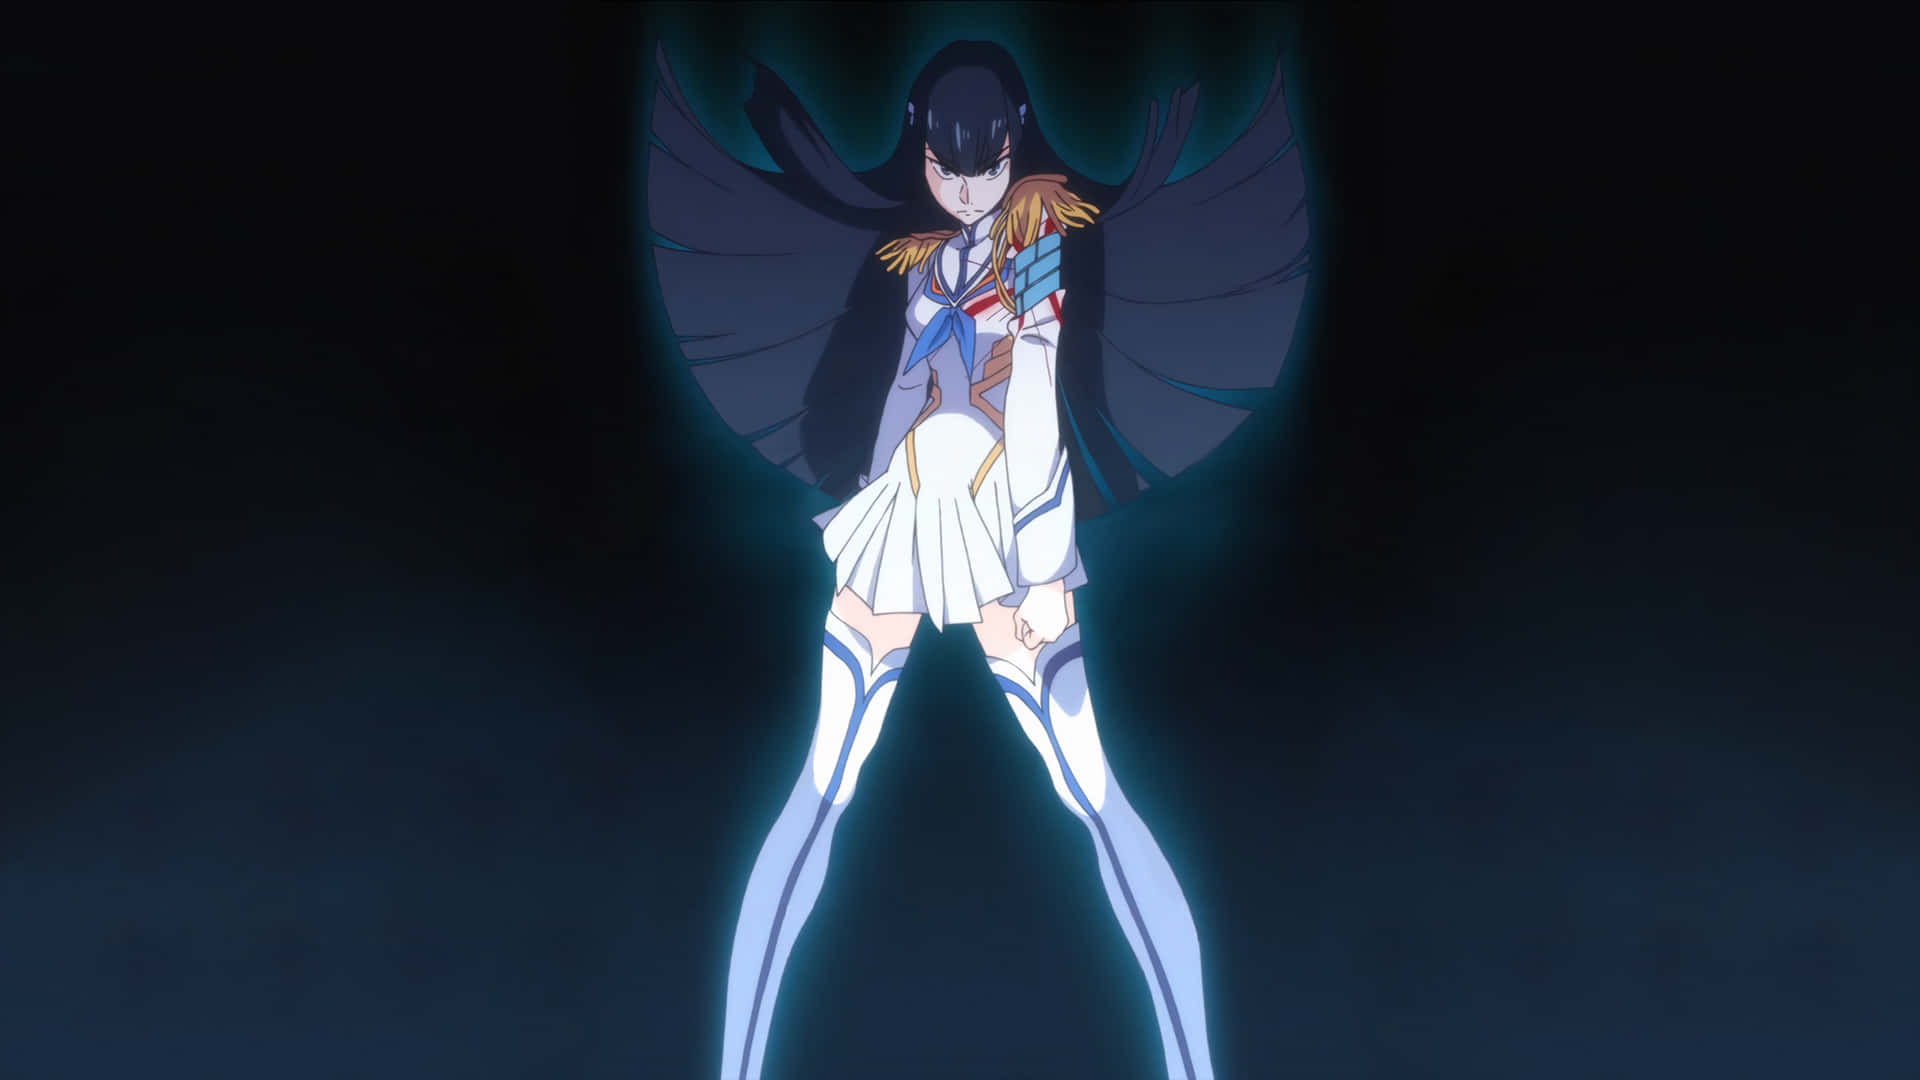 Satsuki Kiryuin, a determined and powerful leader, stands tall and proud. Wallpaper